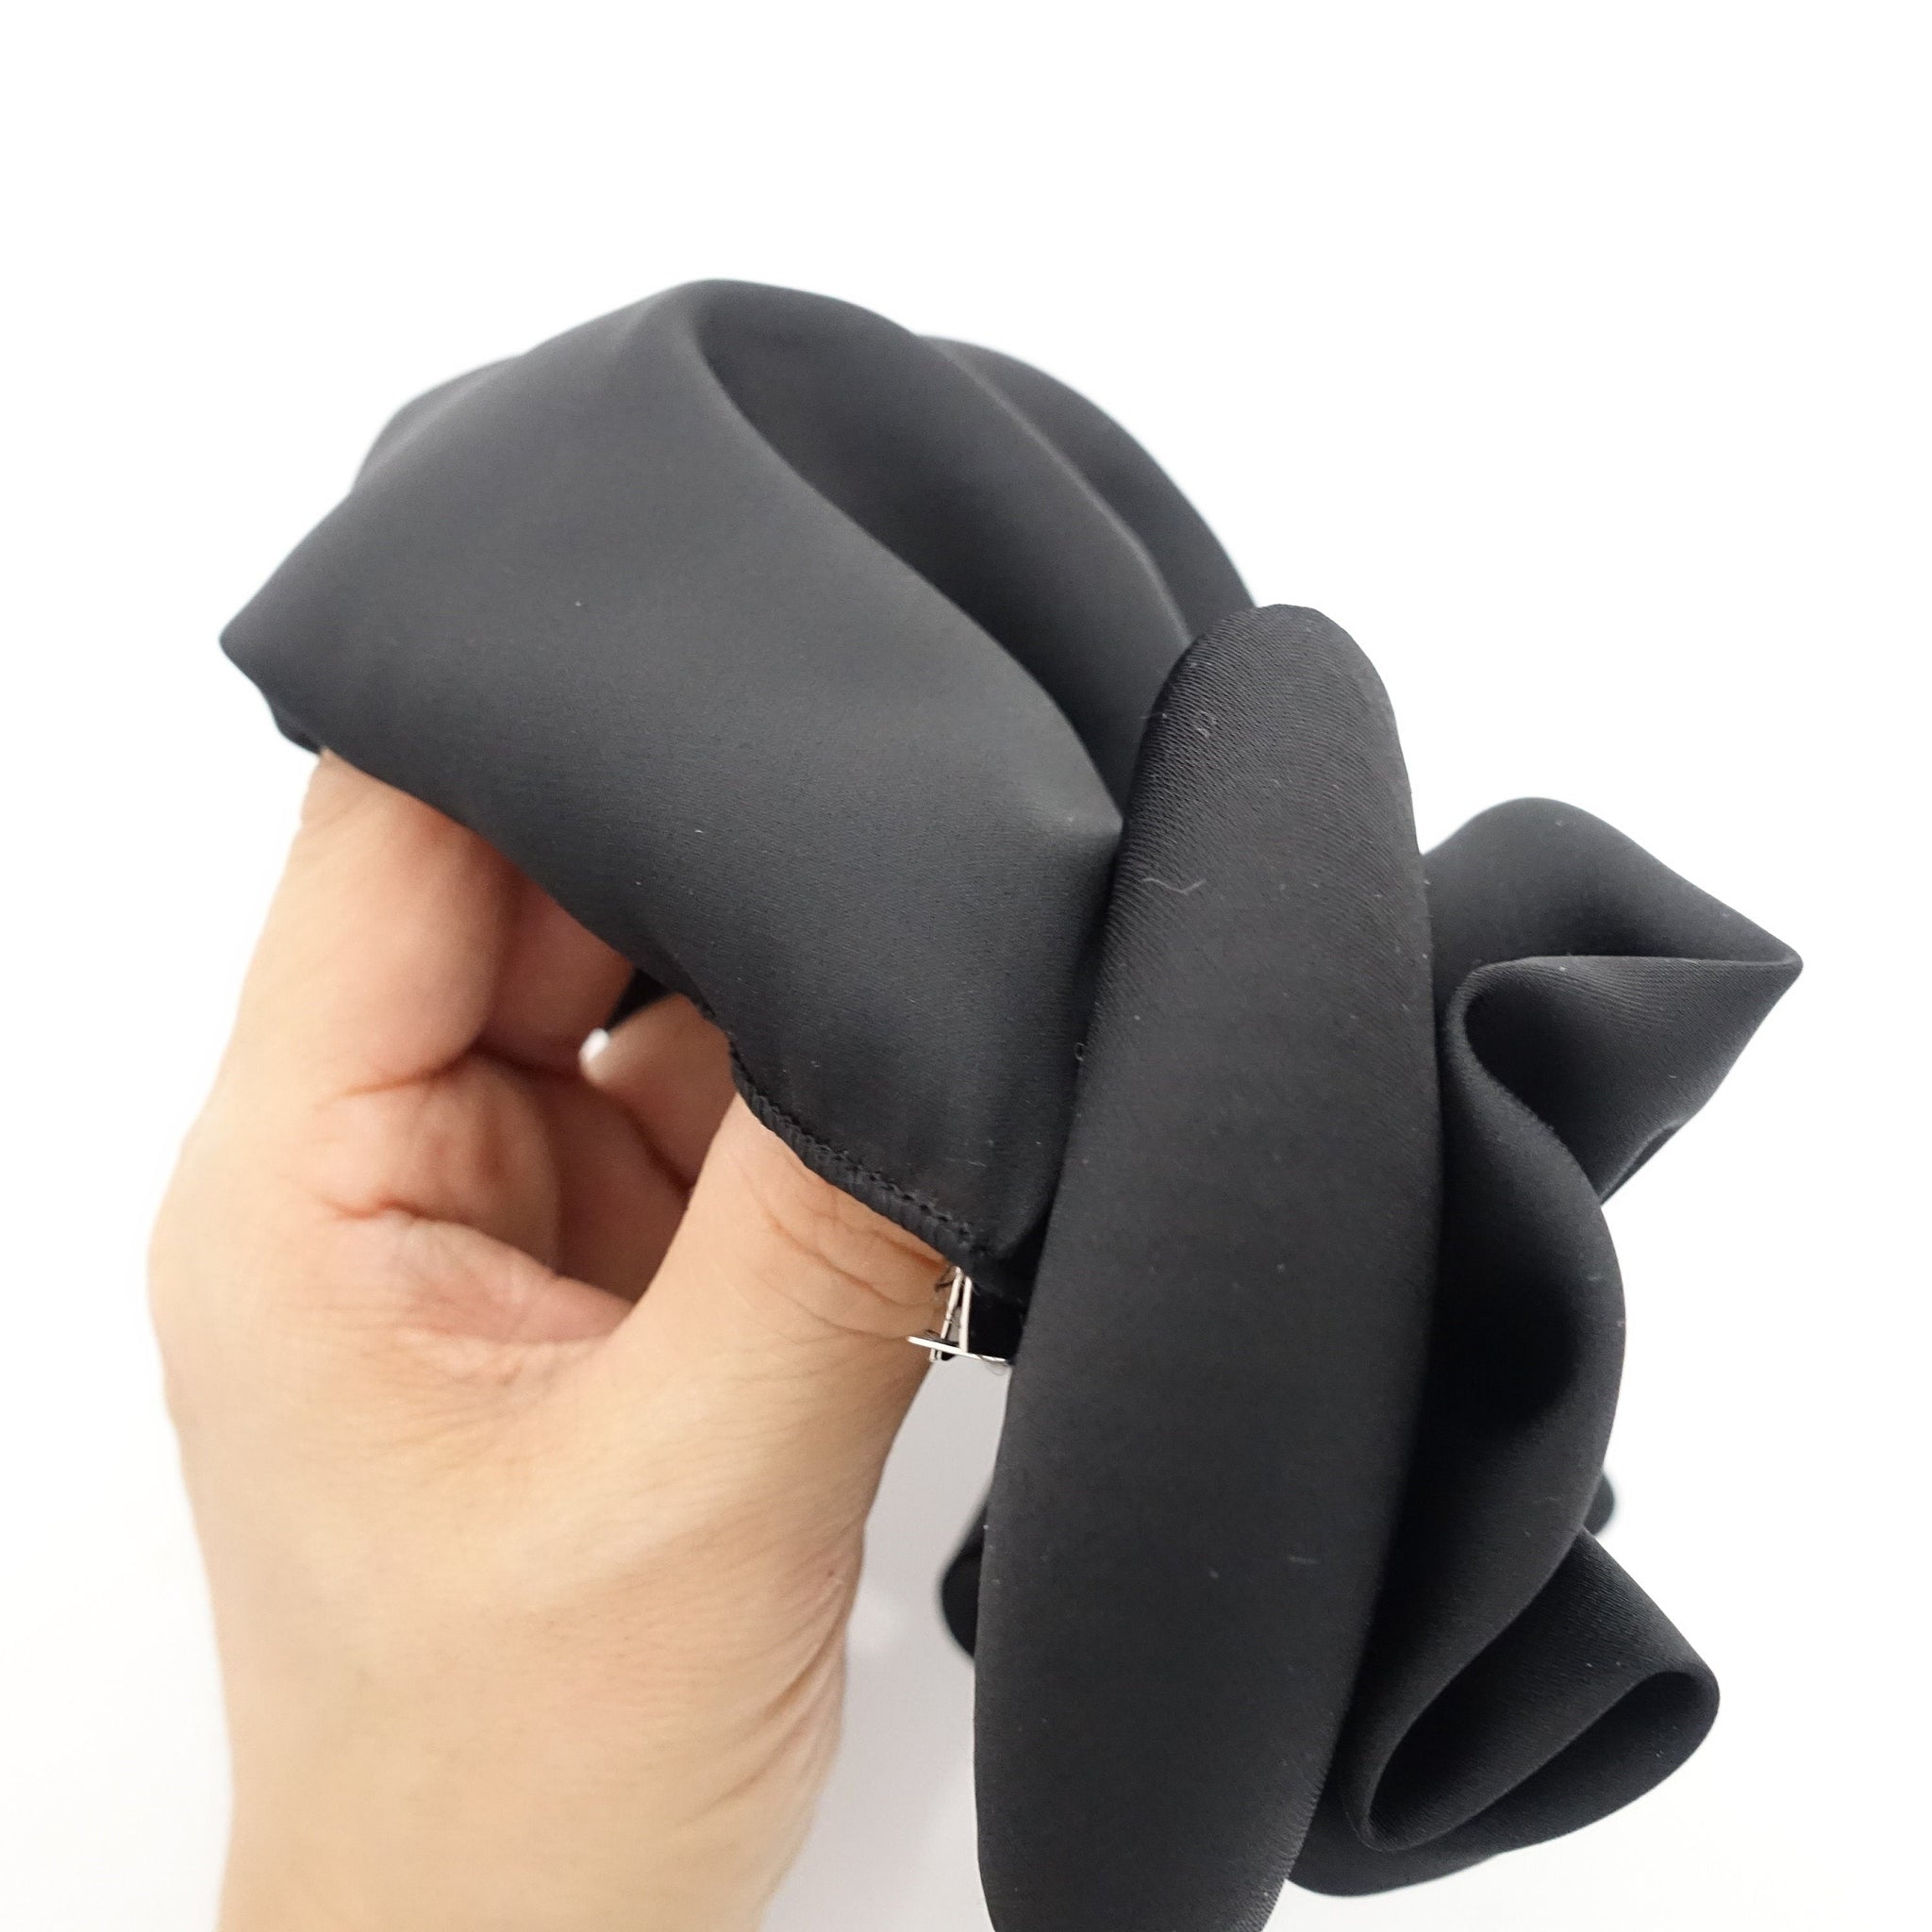 veryshine.com Barrette (Bow) covered snood net professional hair bow french barrette